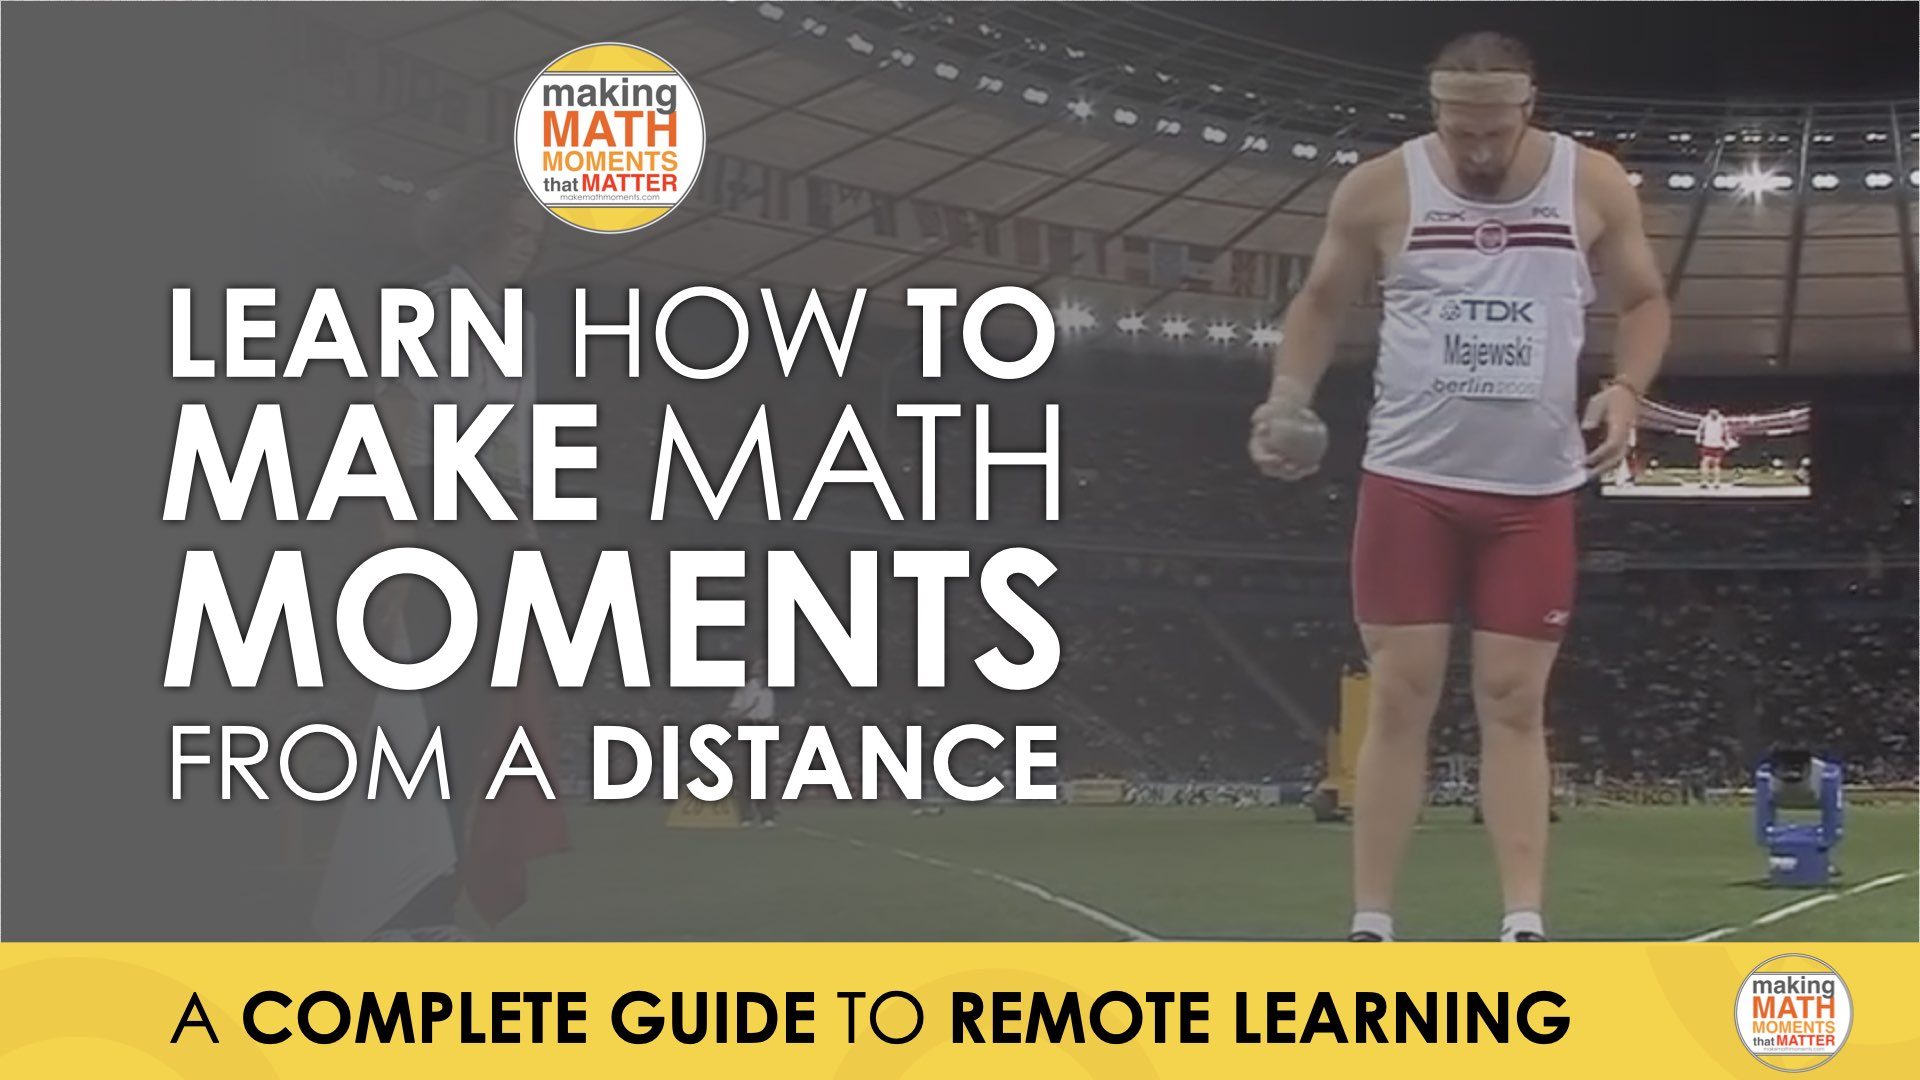 How To Make Math Moments From A Distance - Guide FEATURED